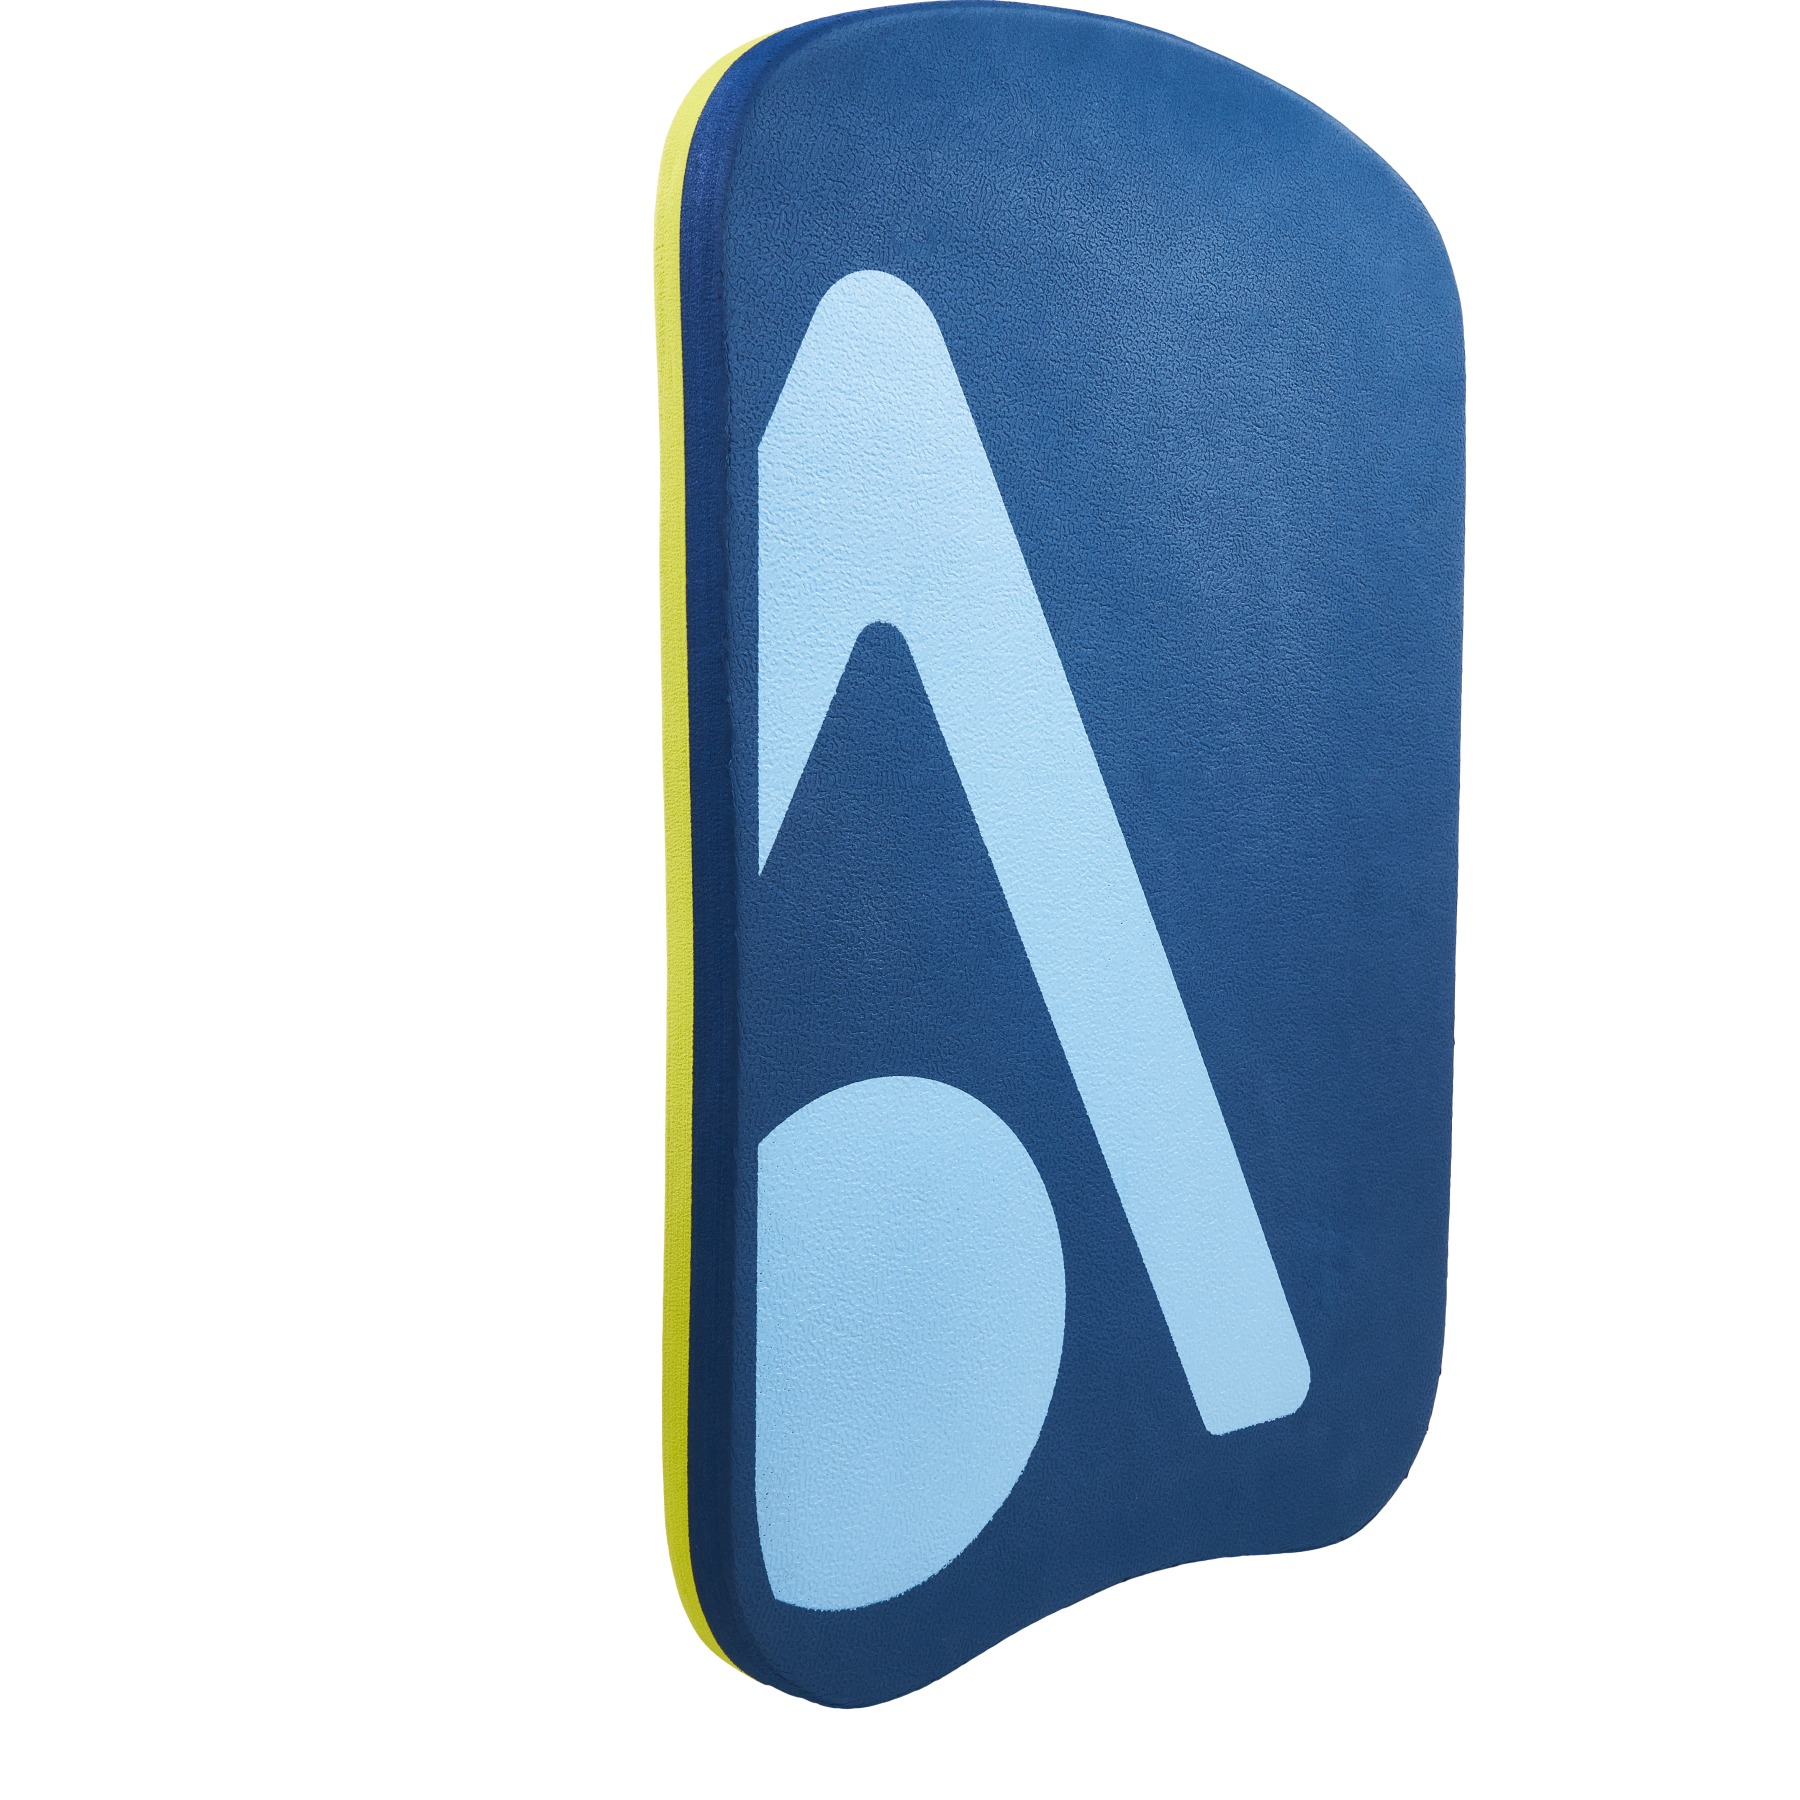 Picture of AQUASPHERE Kickboard - Navy Blue/Bright Yellow